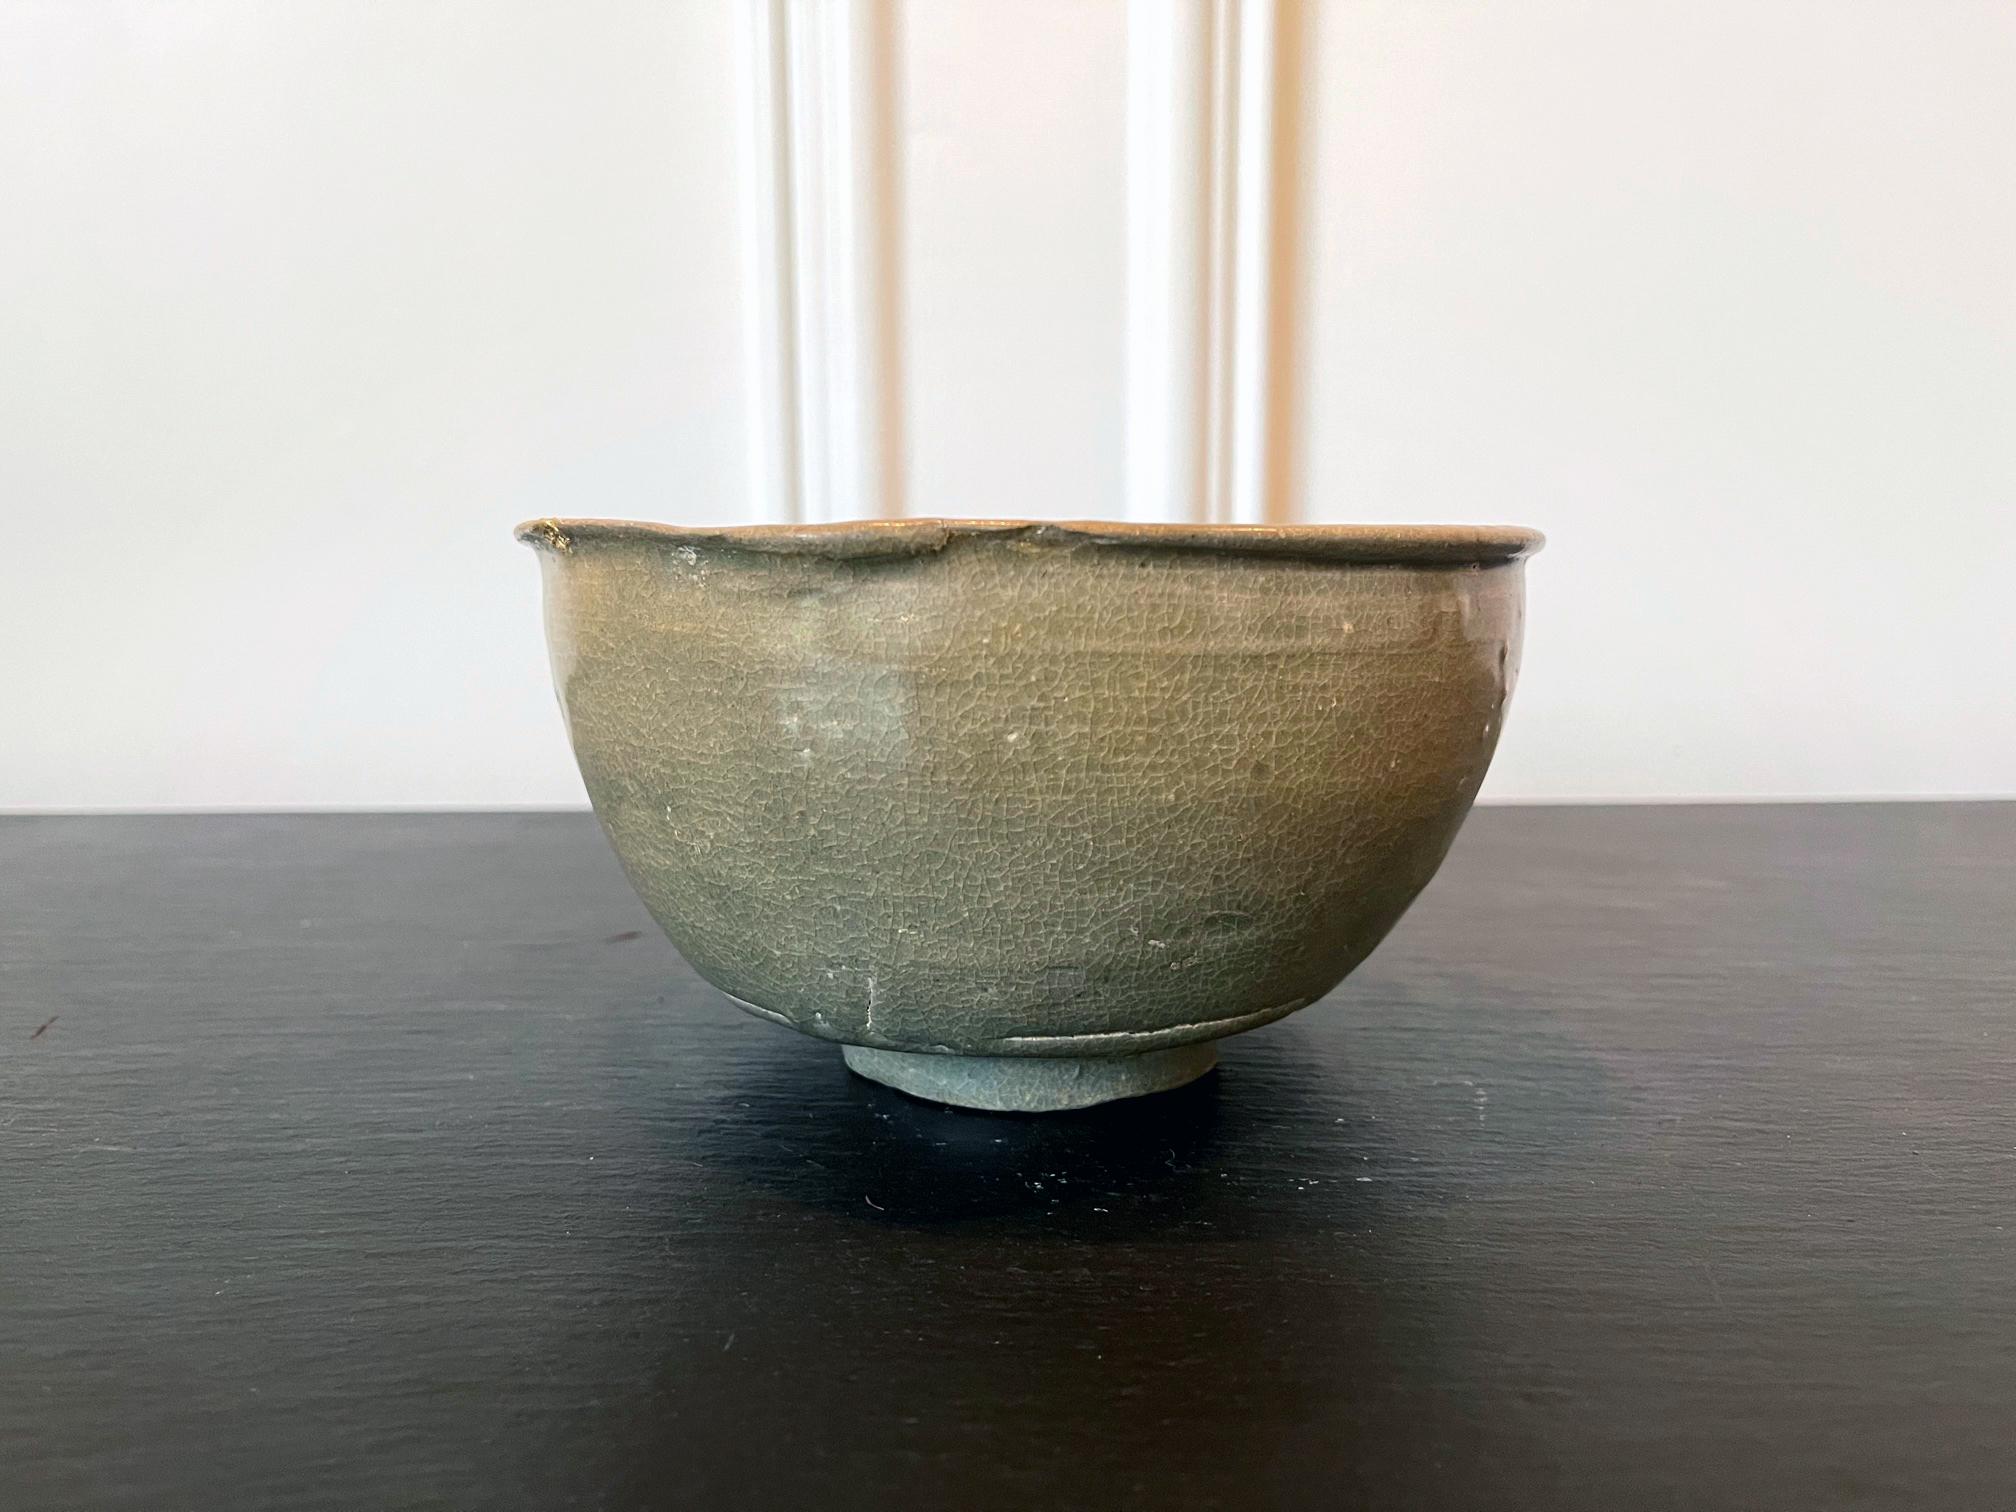 A ceramic bowl with celadon glaze from Korea, circa 14th century (late Goryeo Dynasty). The particular shape of the bowl suggests that it is likely a 